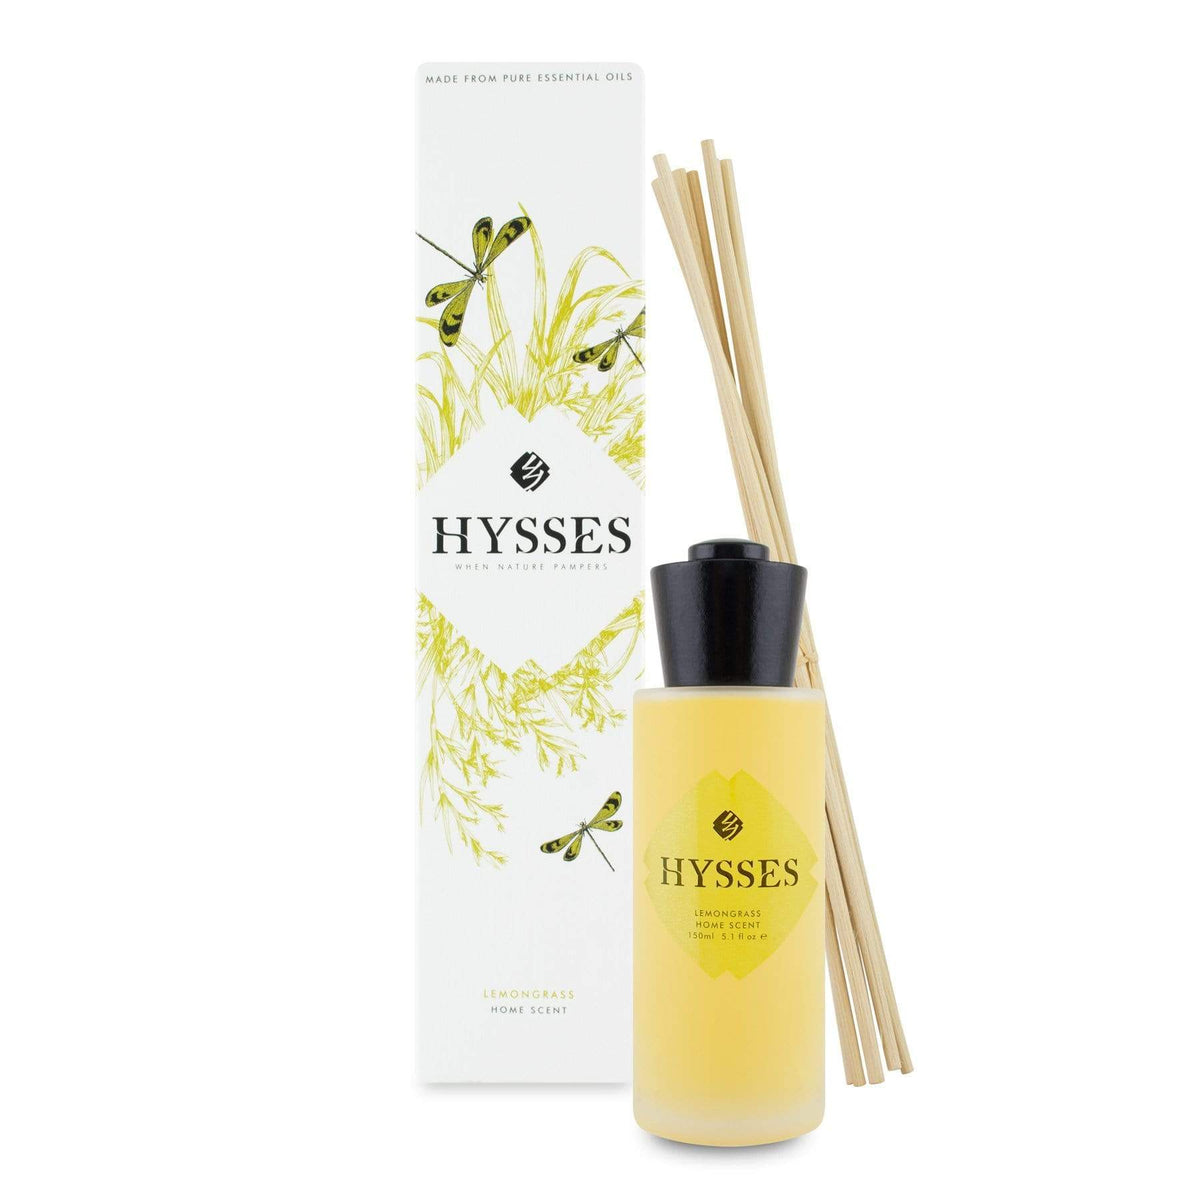 Hysses Home Scents 150ml Home Scent Reed Diffuser Lemongrass